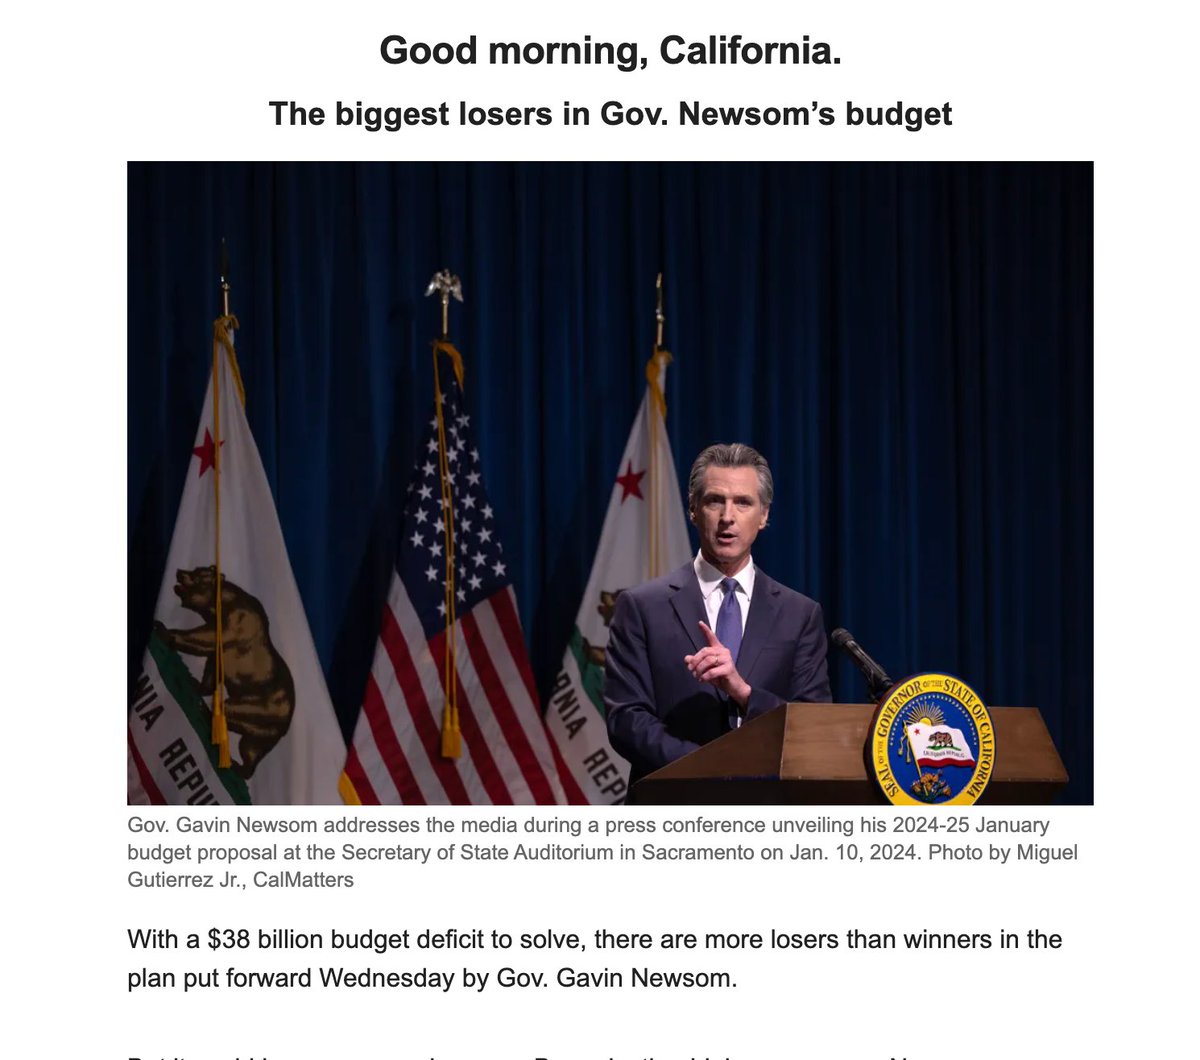 It's a $38 billion dollar deficit, according to #GavinMath @lynnlaaa (@CalMatters). According to the objective @LAO_CA, it's $68 billion. Normalizing @GavinNewsom's political spin lays the foundation for all sorts of budget tricks to deceive Californians on how truly dire the